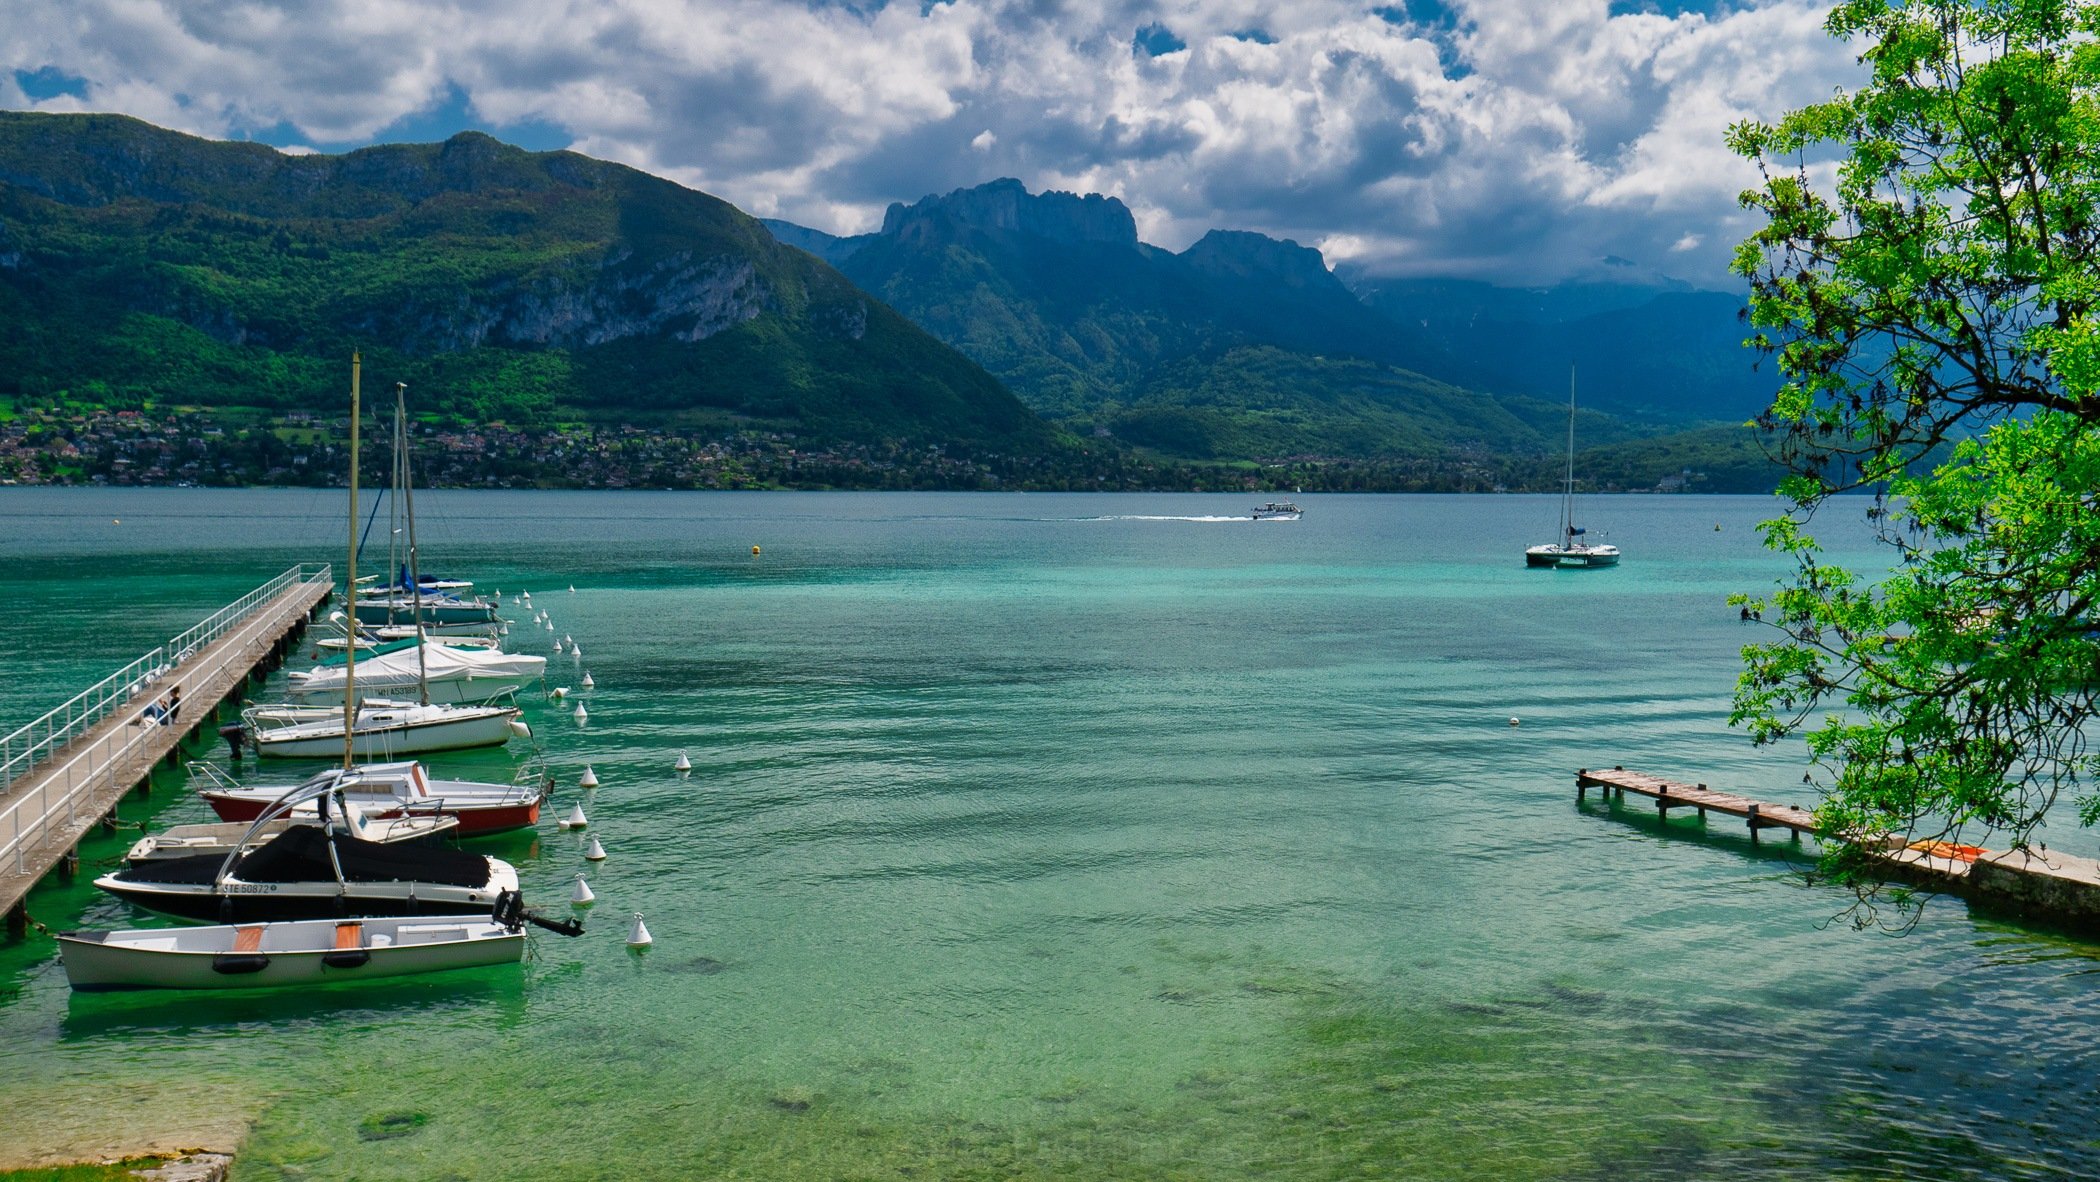 Doussard to Annecy - Tour de Lac cycle route